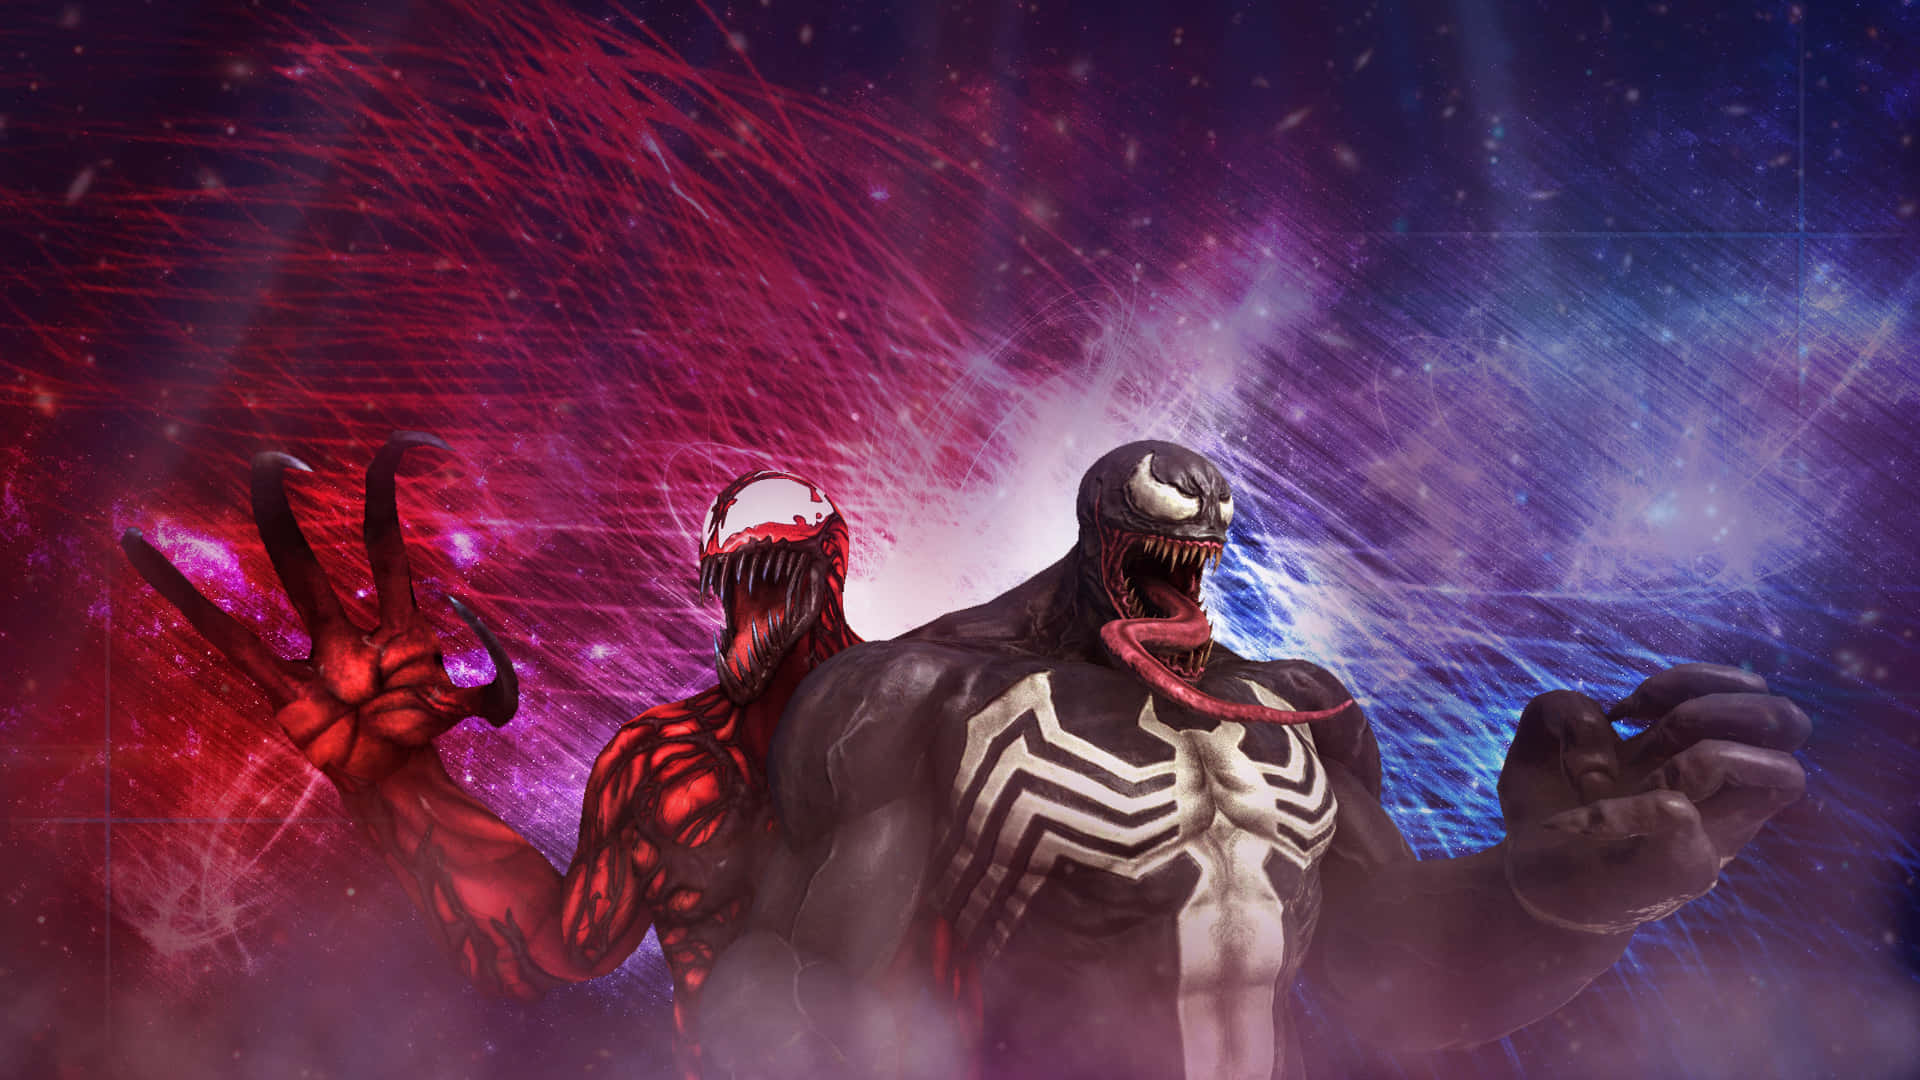 Cool Venom Vs Carnage Red And Blue Background Wallpaper